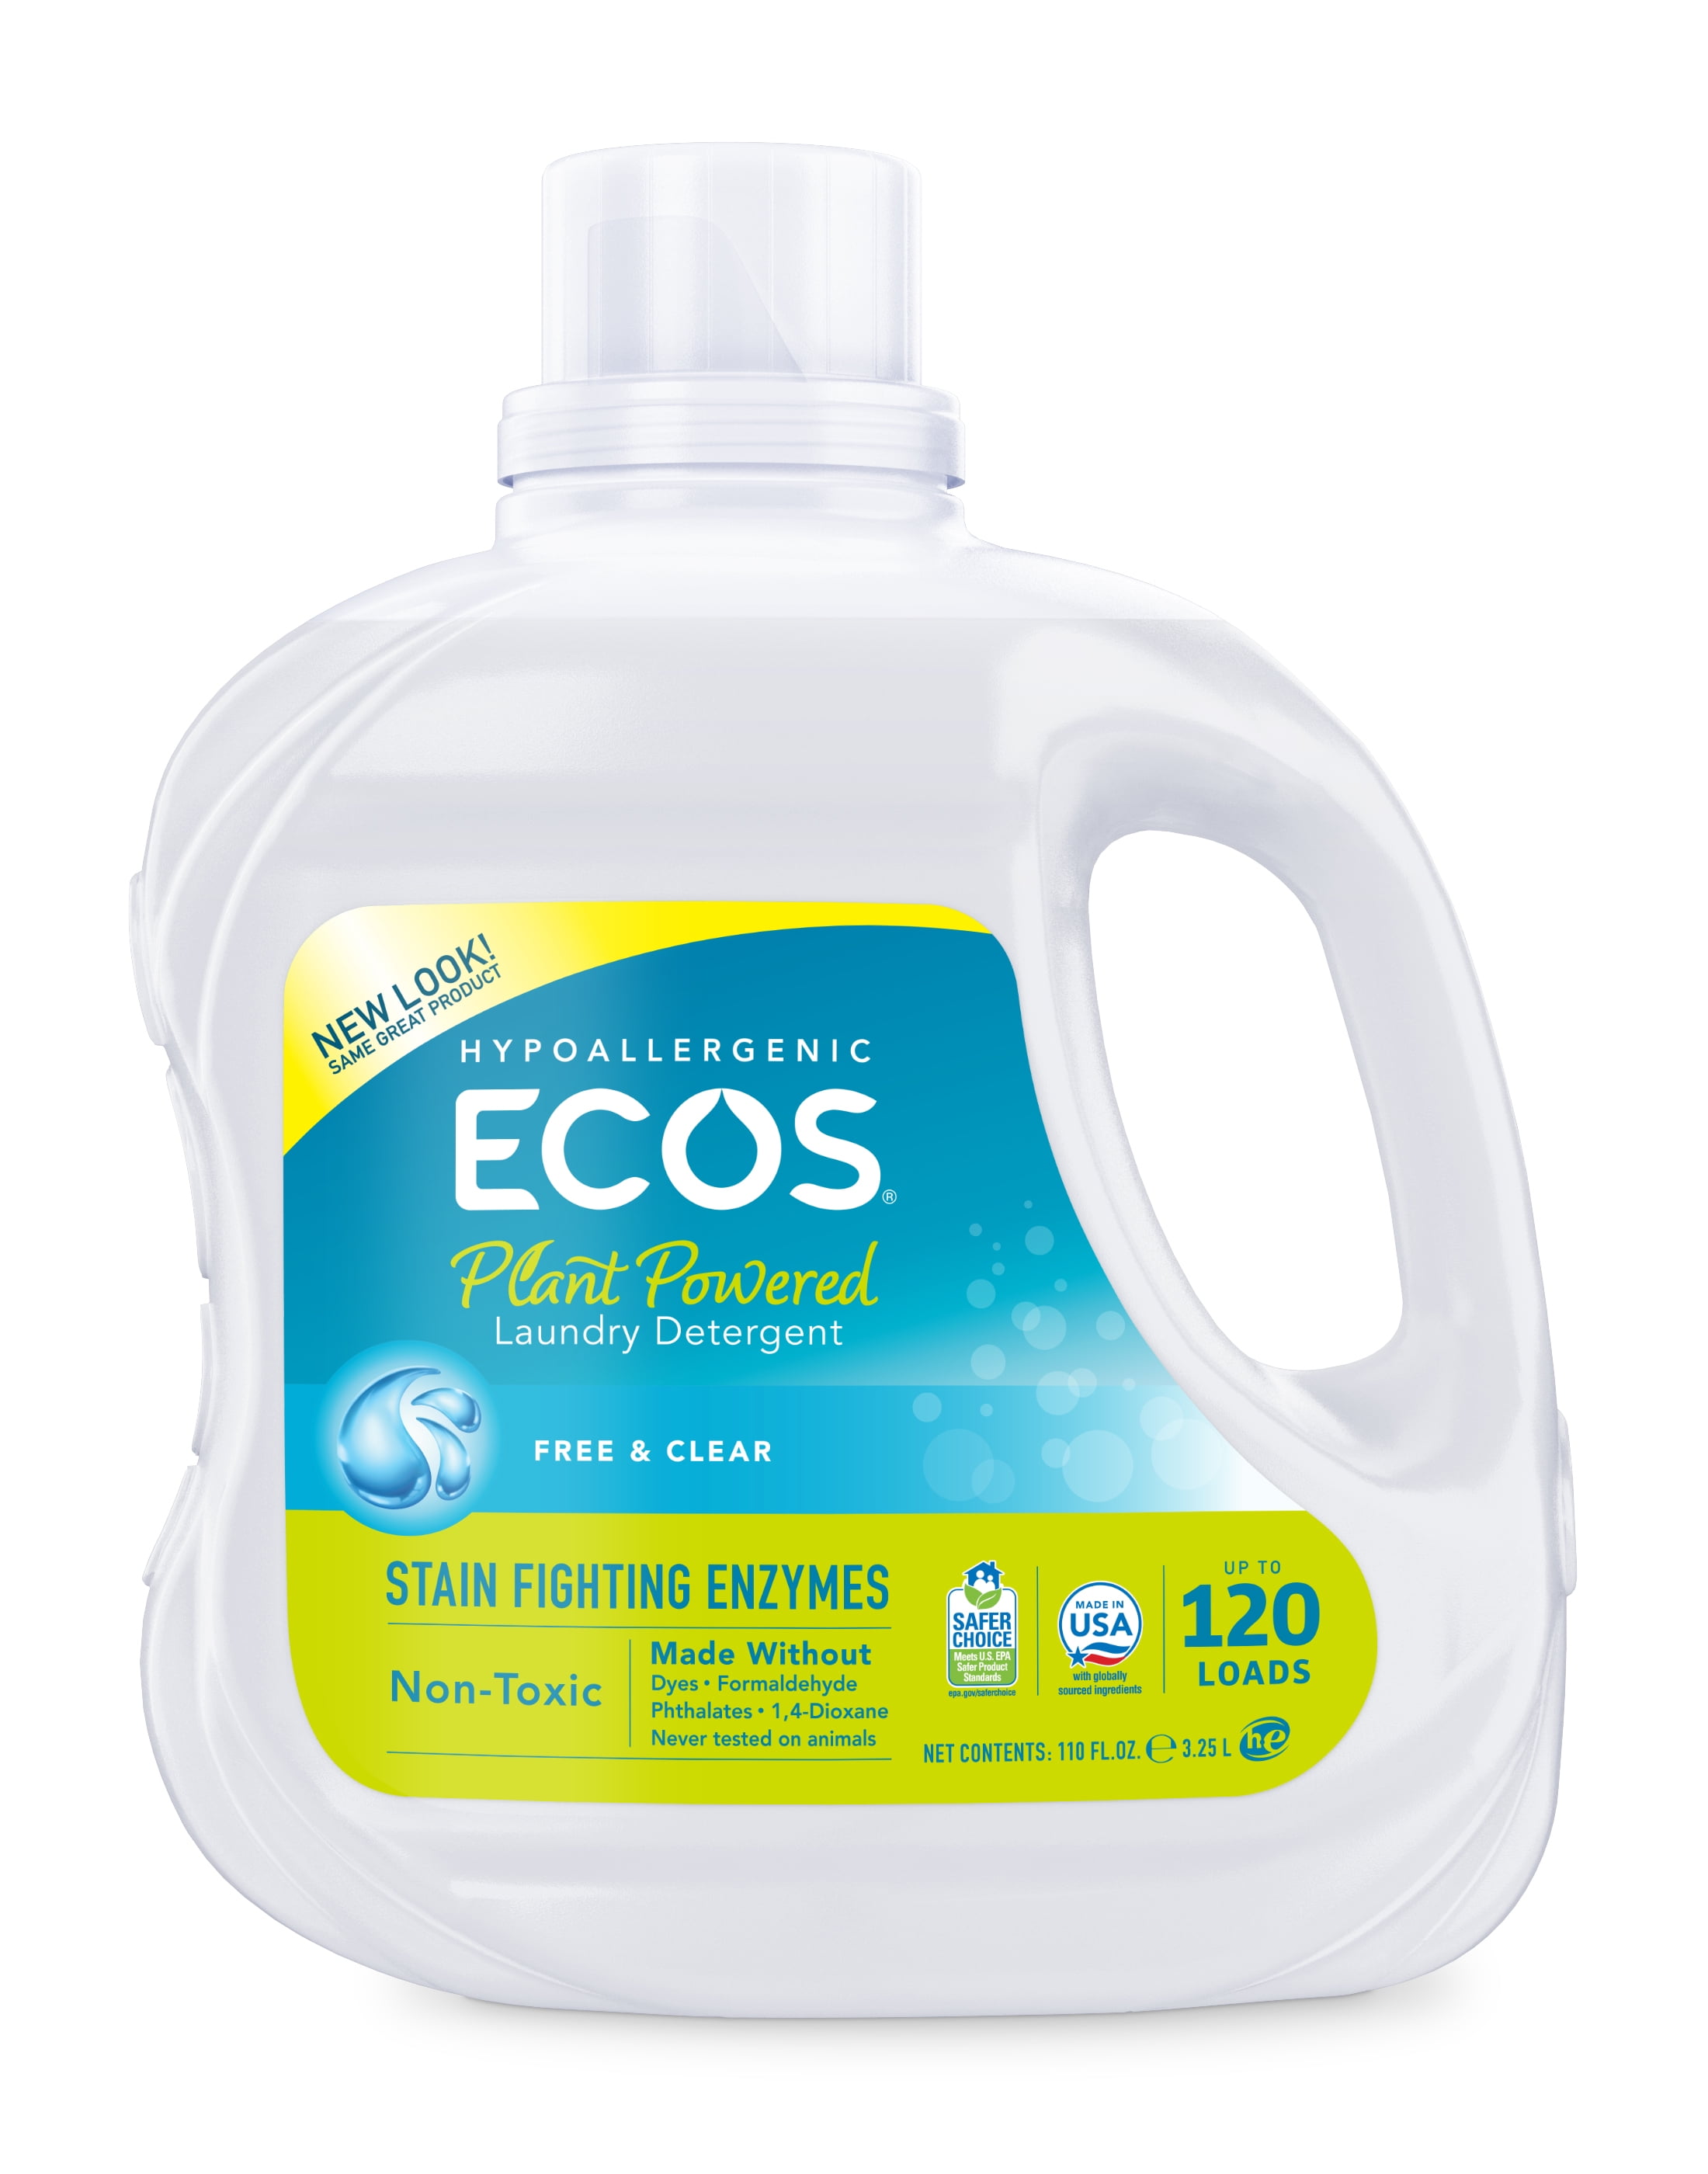 Eco-Conscious Laundry Sheets, Our Hypoallergenic Detergent Without